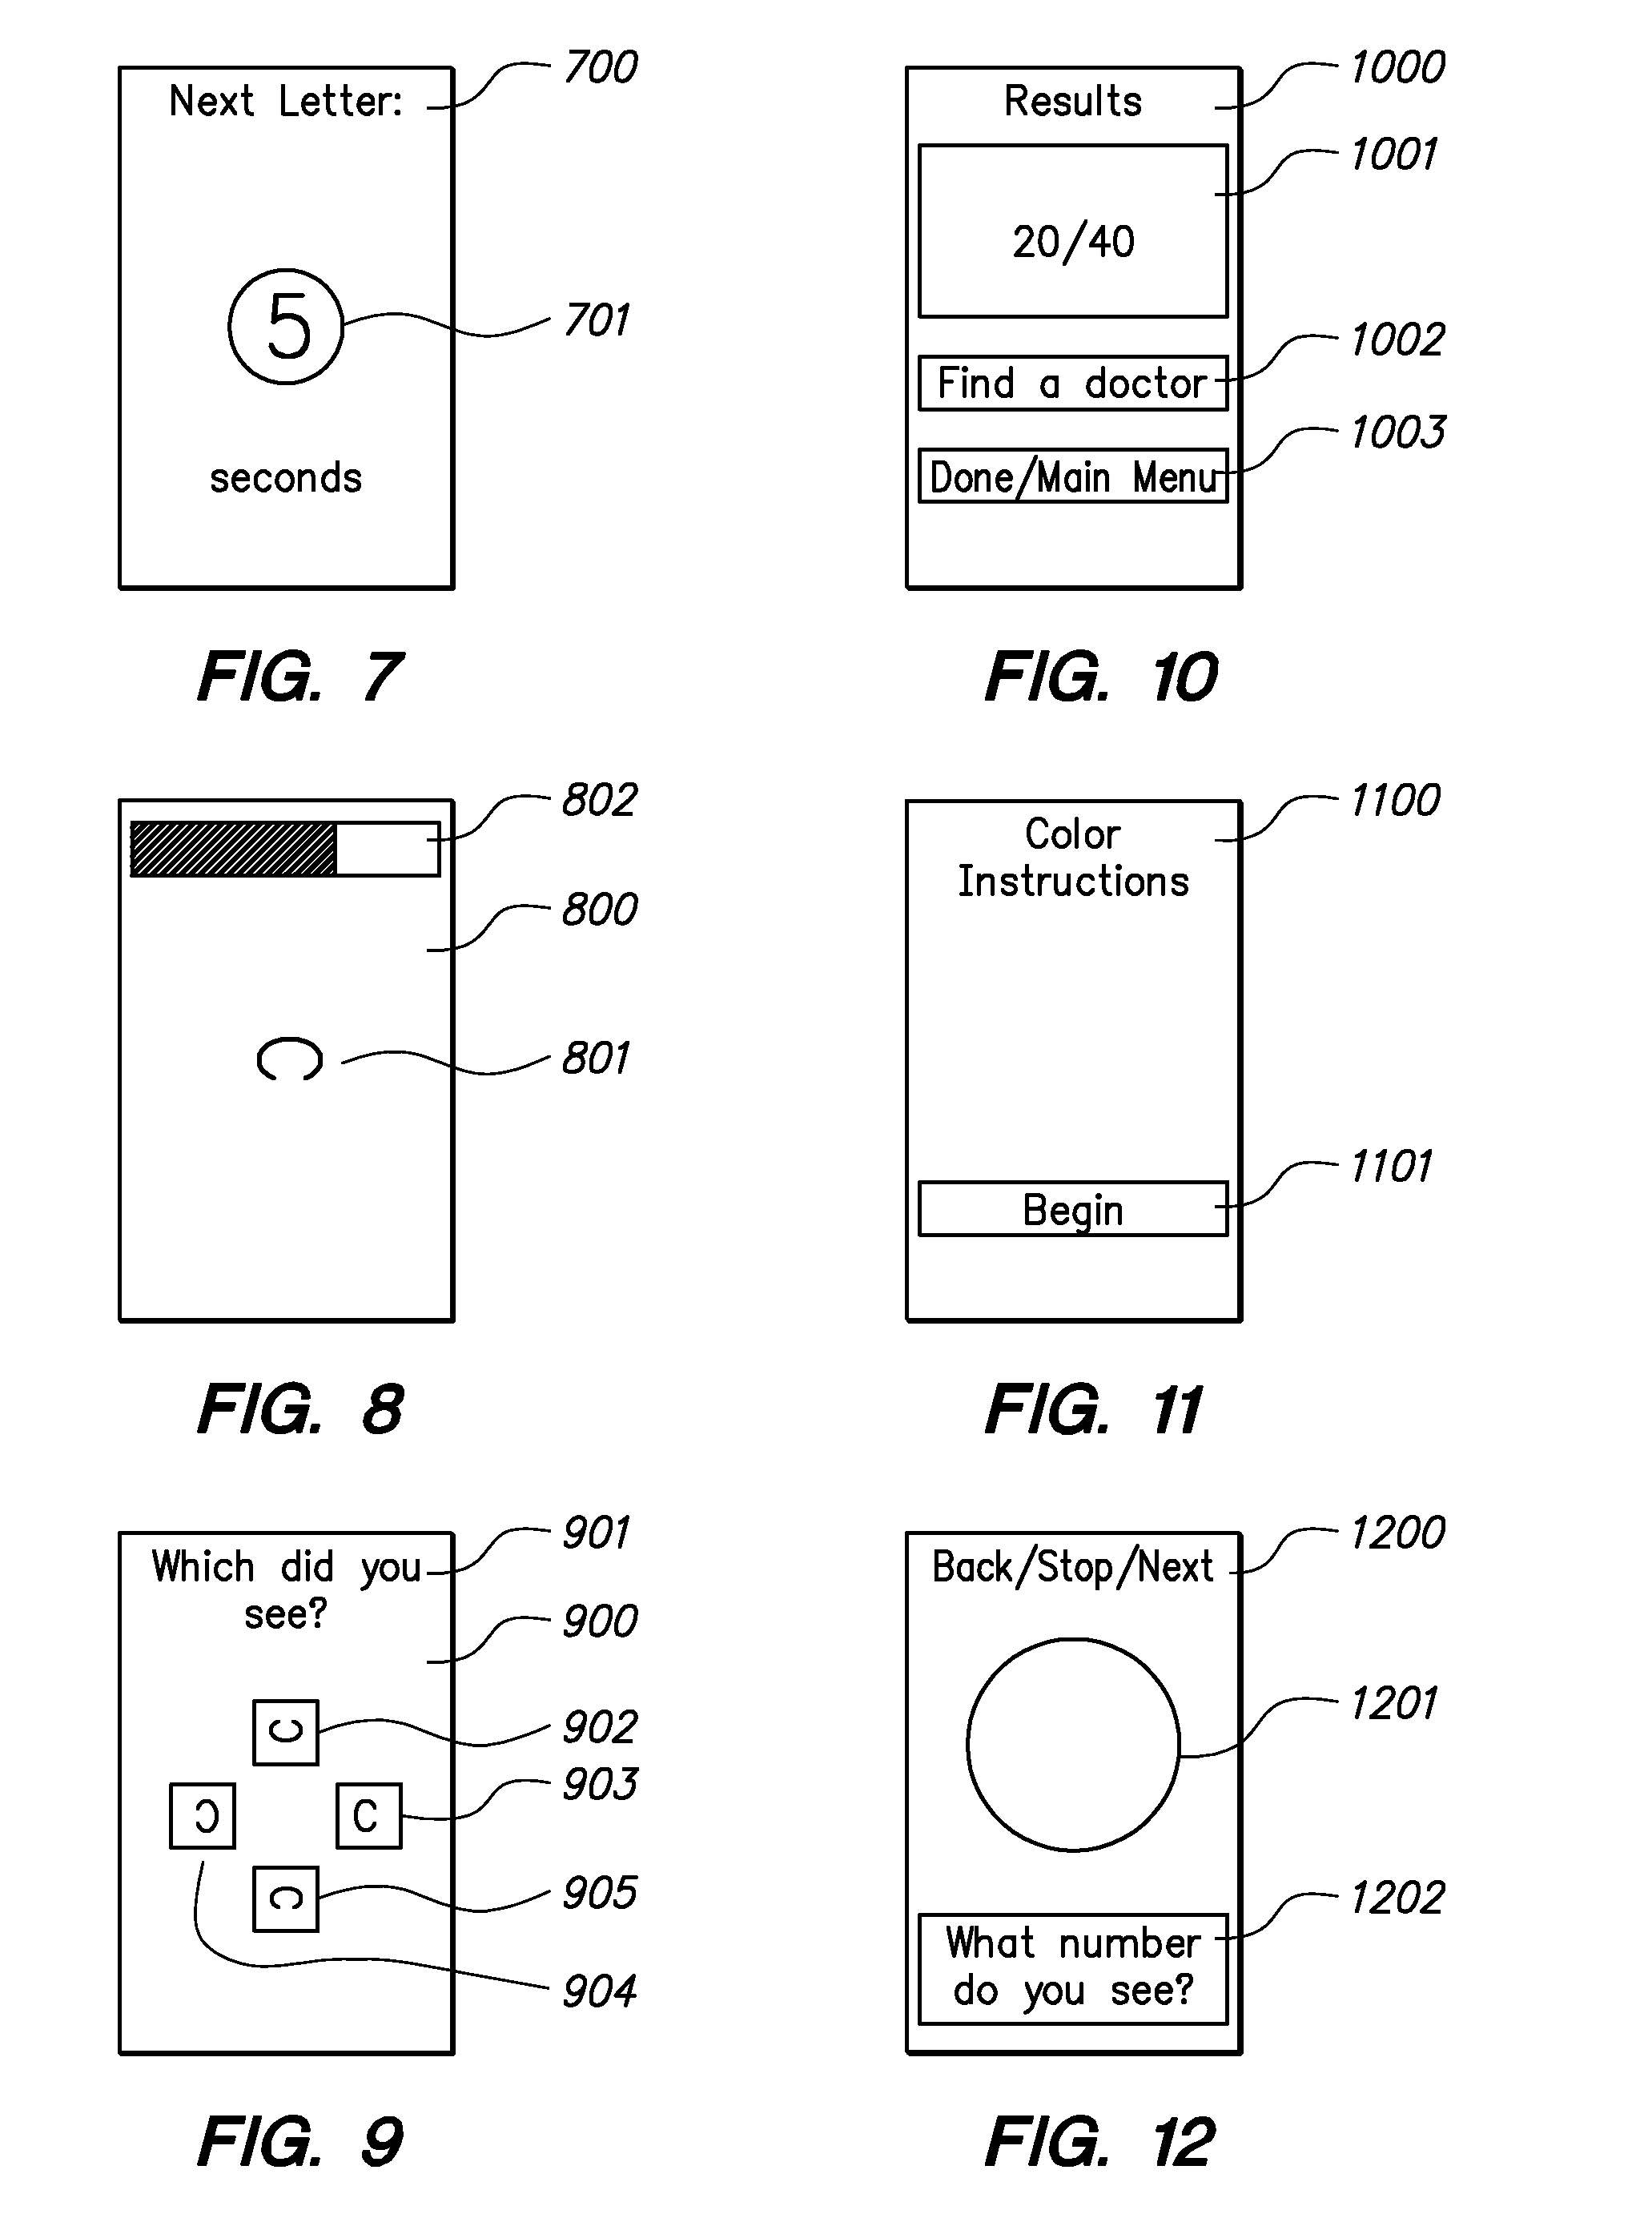 Method and System for Self-Administering a Visual Examination Using a Mobile Computing Device